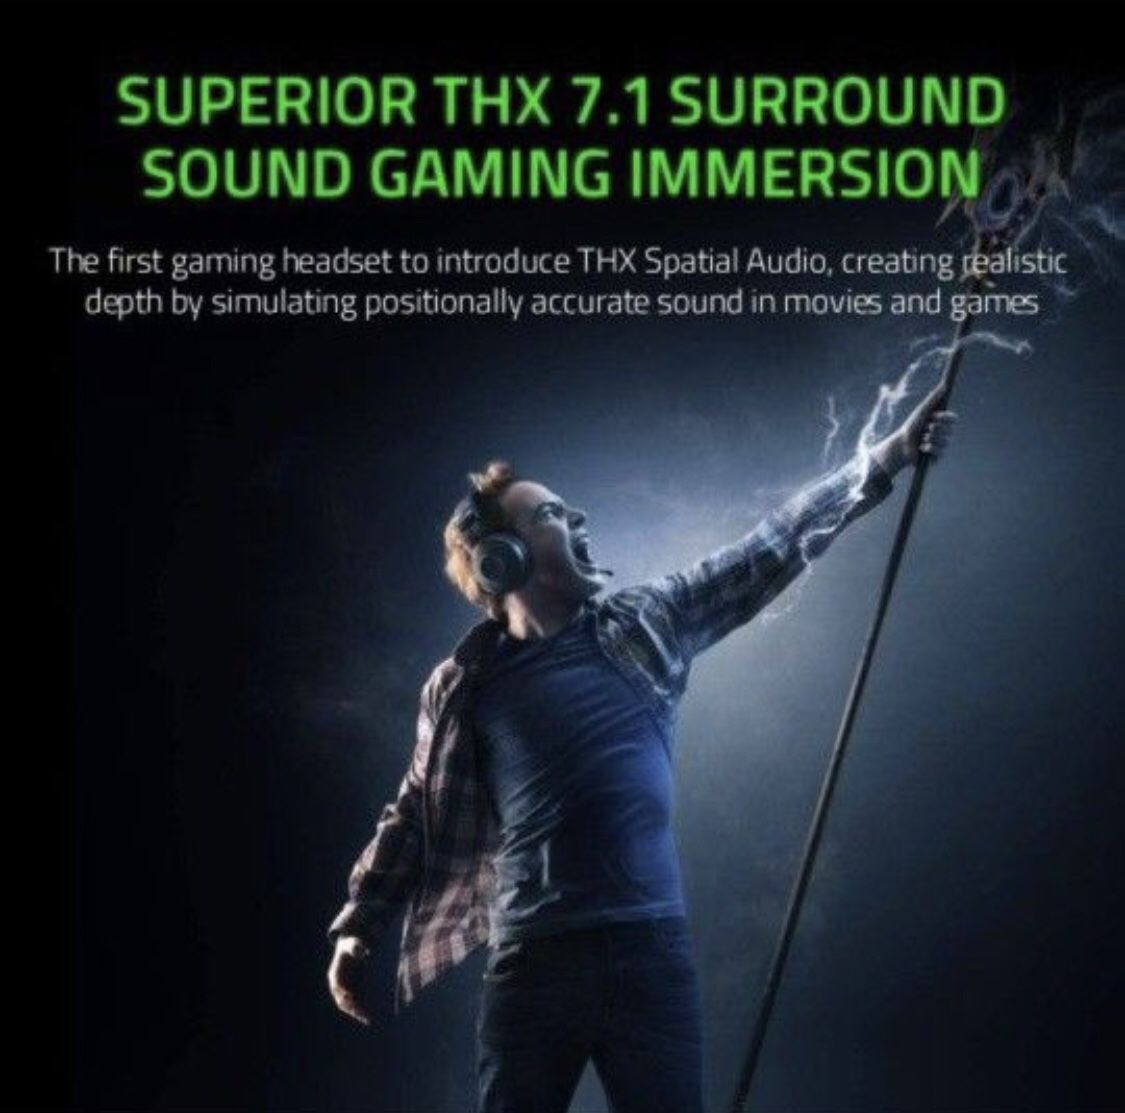 Razer Kraken Tournament Edition THX 7.1 Surround Sound Gaming Headset: Retractable Noise Cancelling Mic - USB DAC -  For PC, PS4, PS5, Nintendo Switch